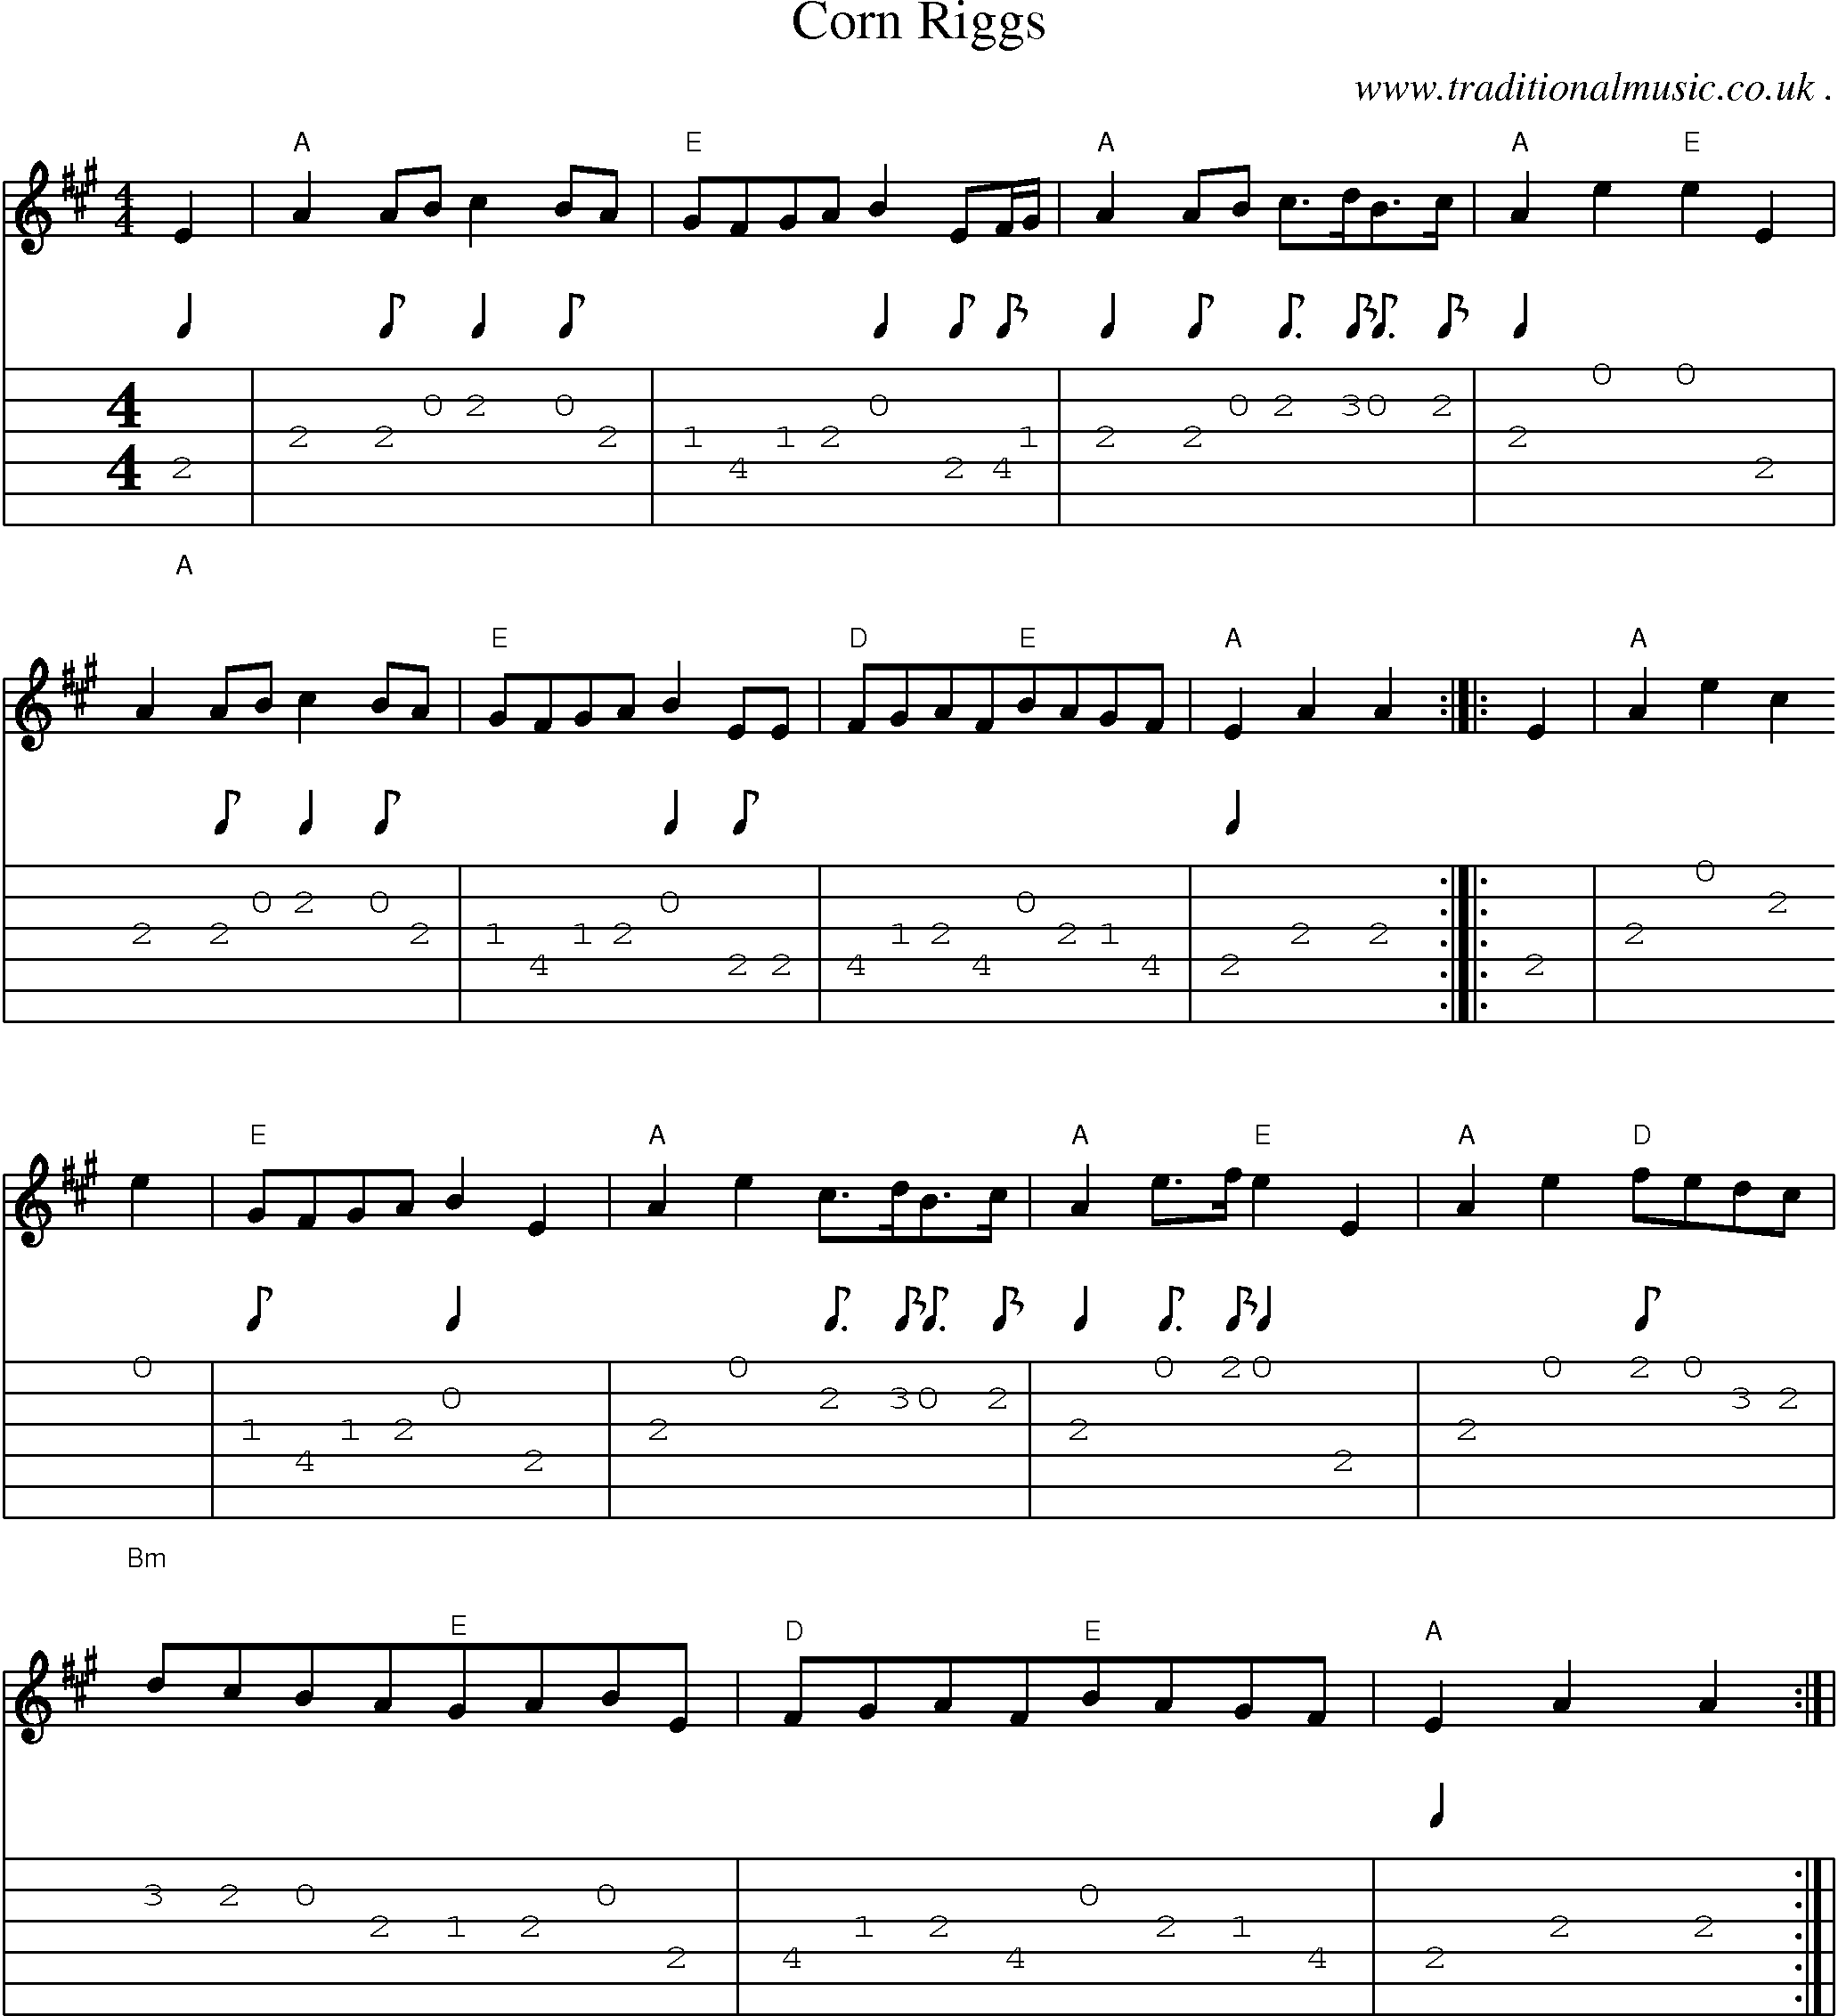 Sheet-Music and Guitar Tabs for Corn Riggs